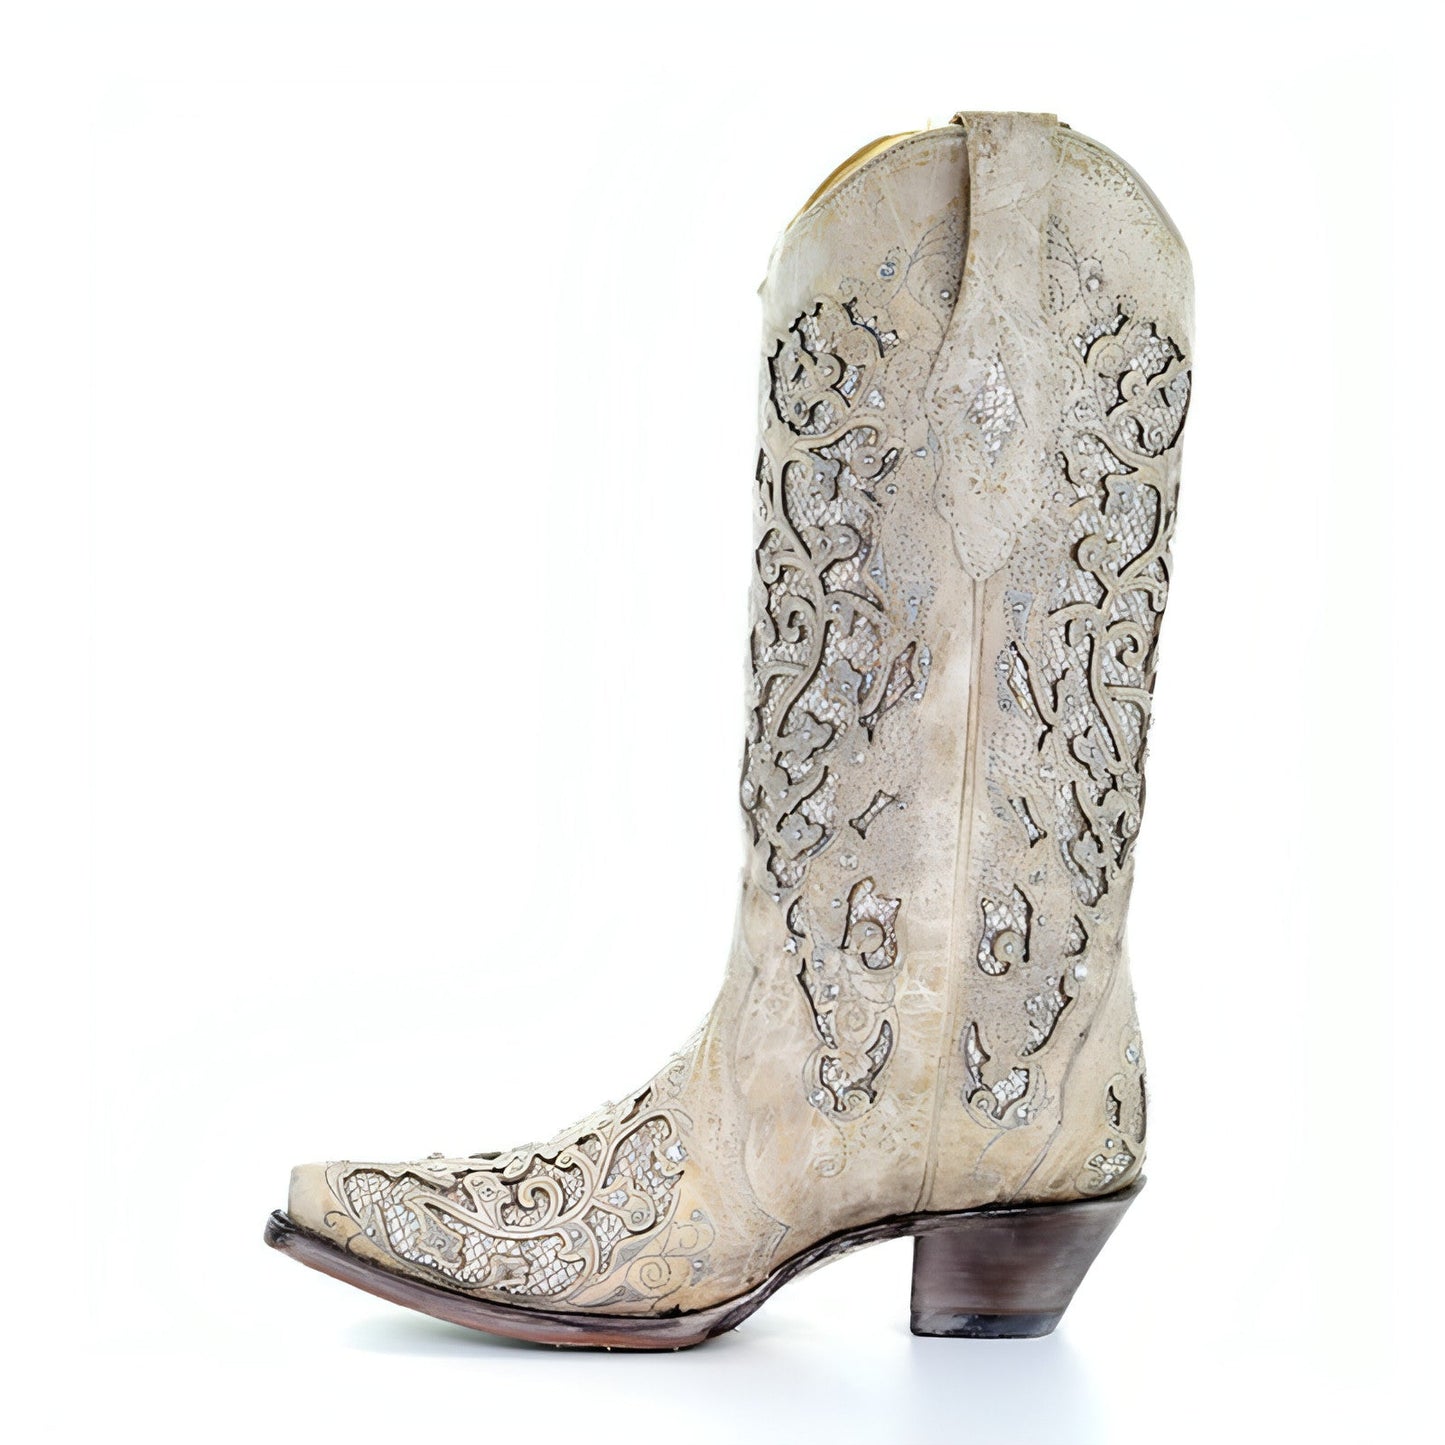 Corral Women's Boots (A3322-M / White)